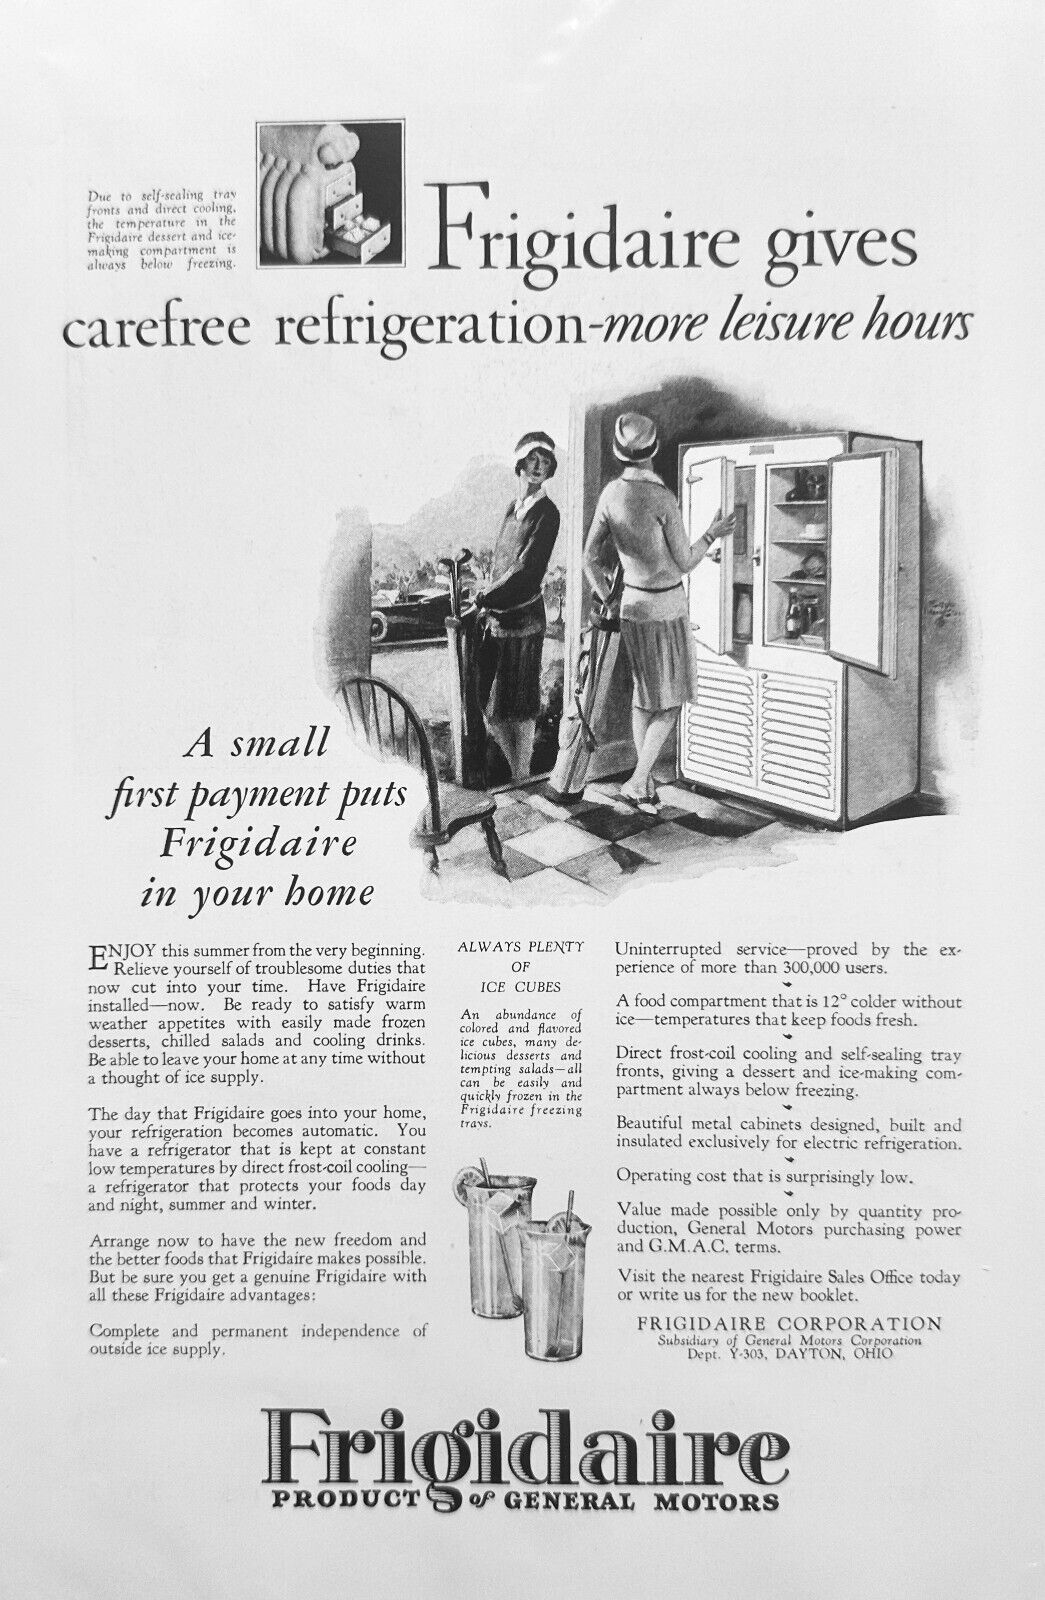 1927 Frigidaire Refrigerator by General Motors - More Leisure Hours - Vintage Ad